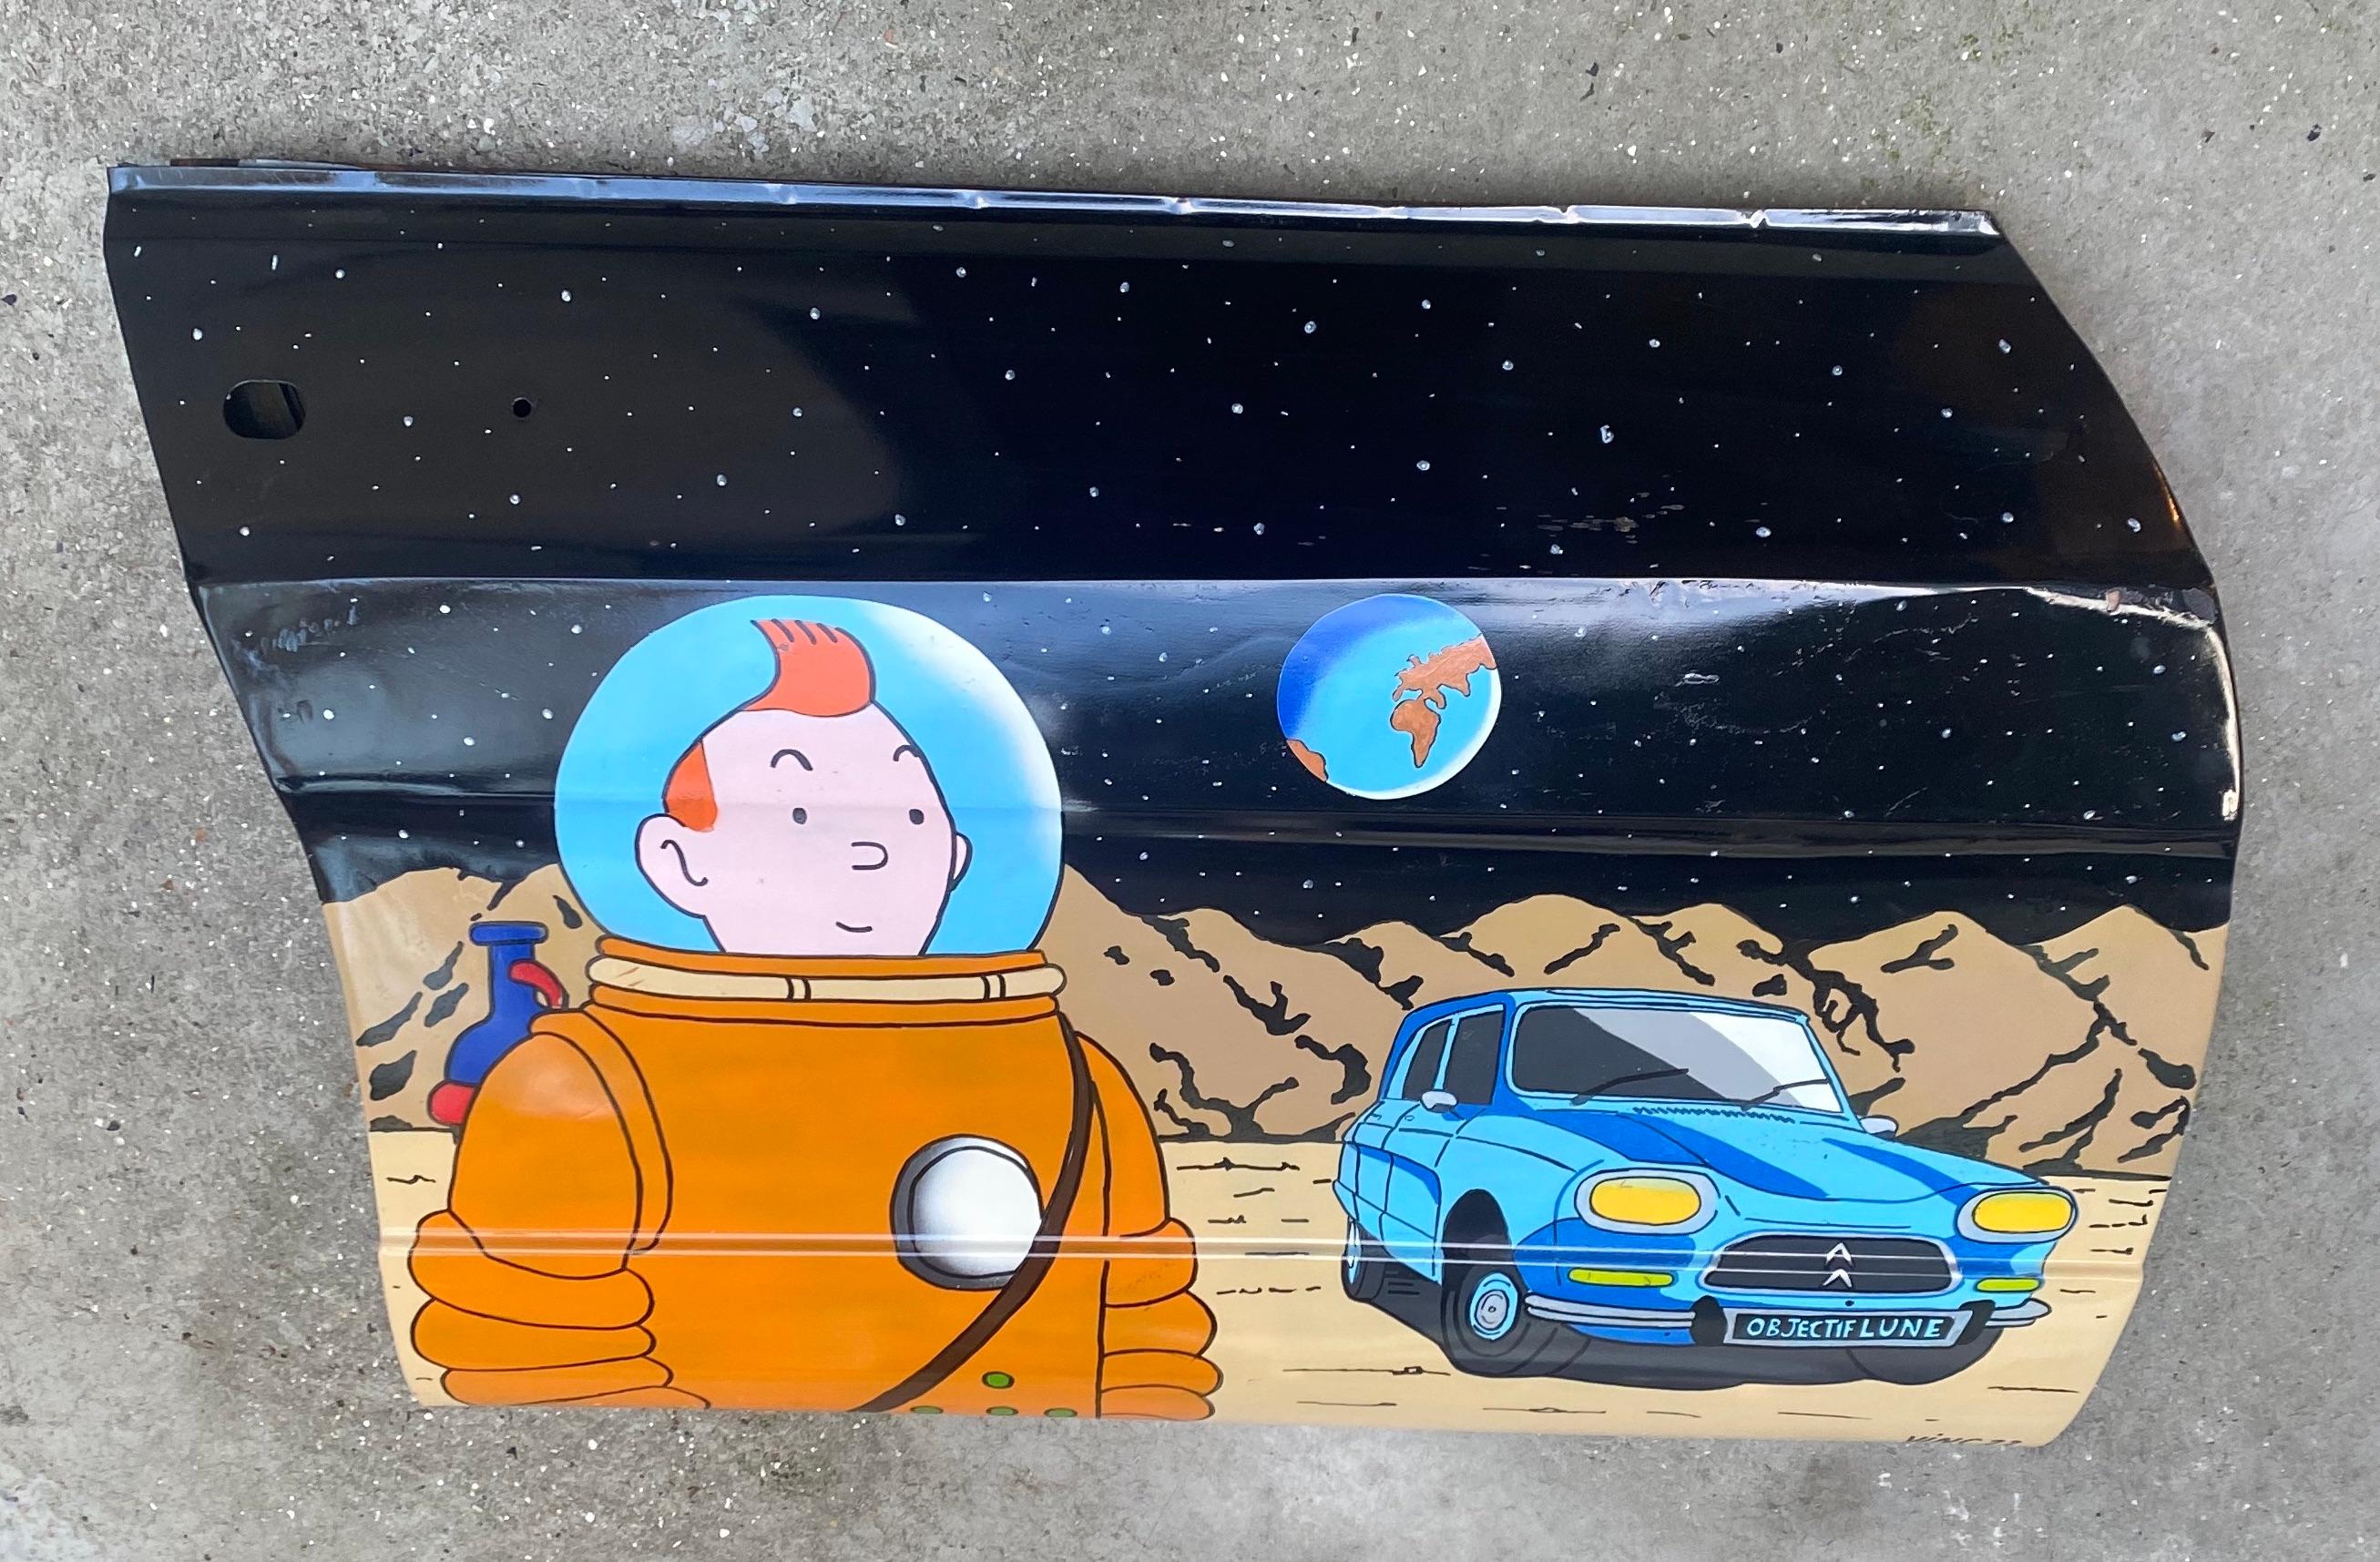 Tintin Citroen Ami 8 on the Moon- Vinc
Objective moon support : door of Citroën ami 8 
Mixed technique 
Posca, acrylic, automotive varnish 
This piece can be exposed outside 
2022
Price : 690€ for this piece.